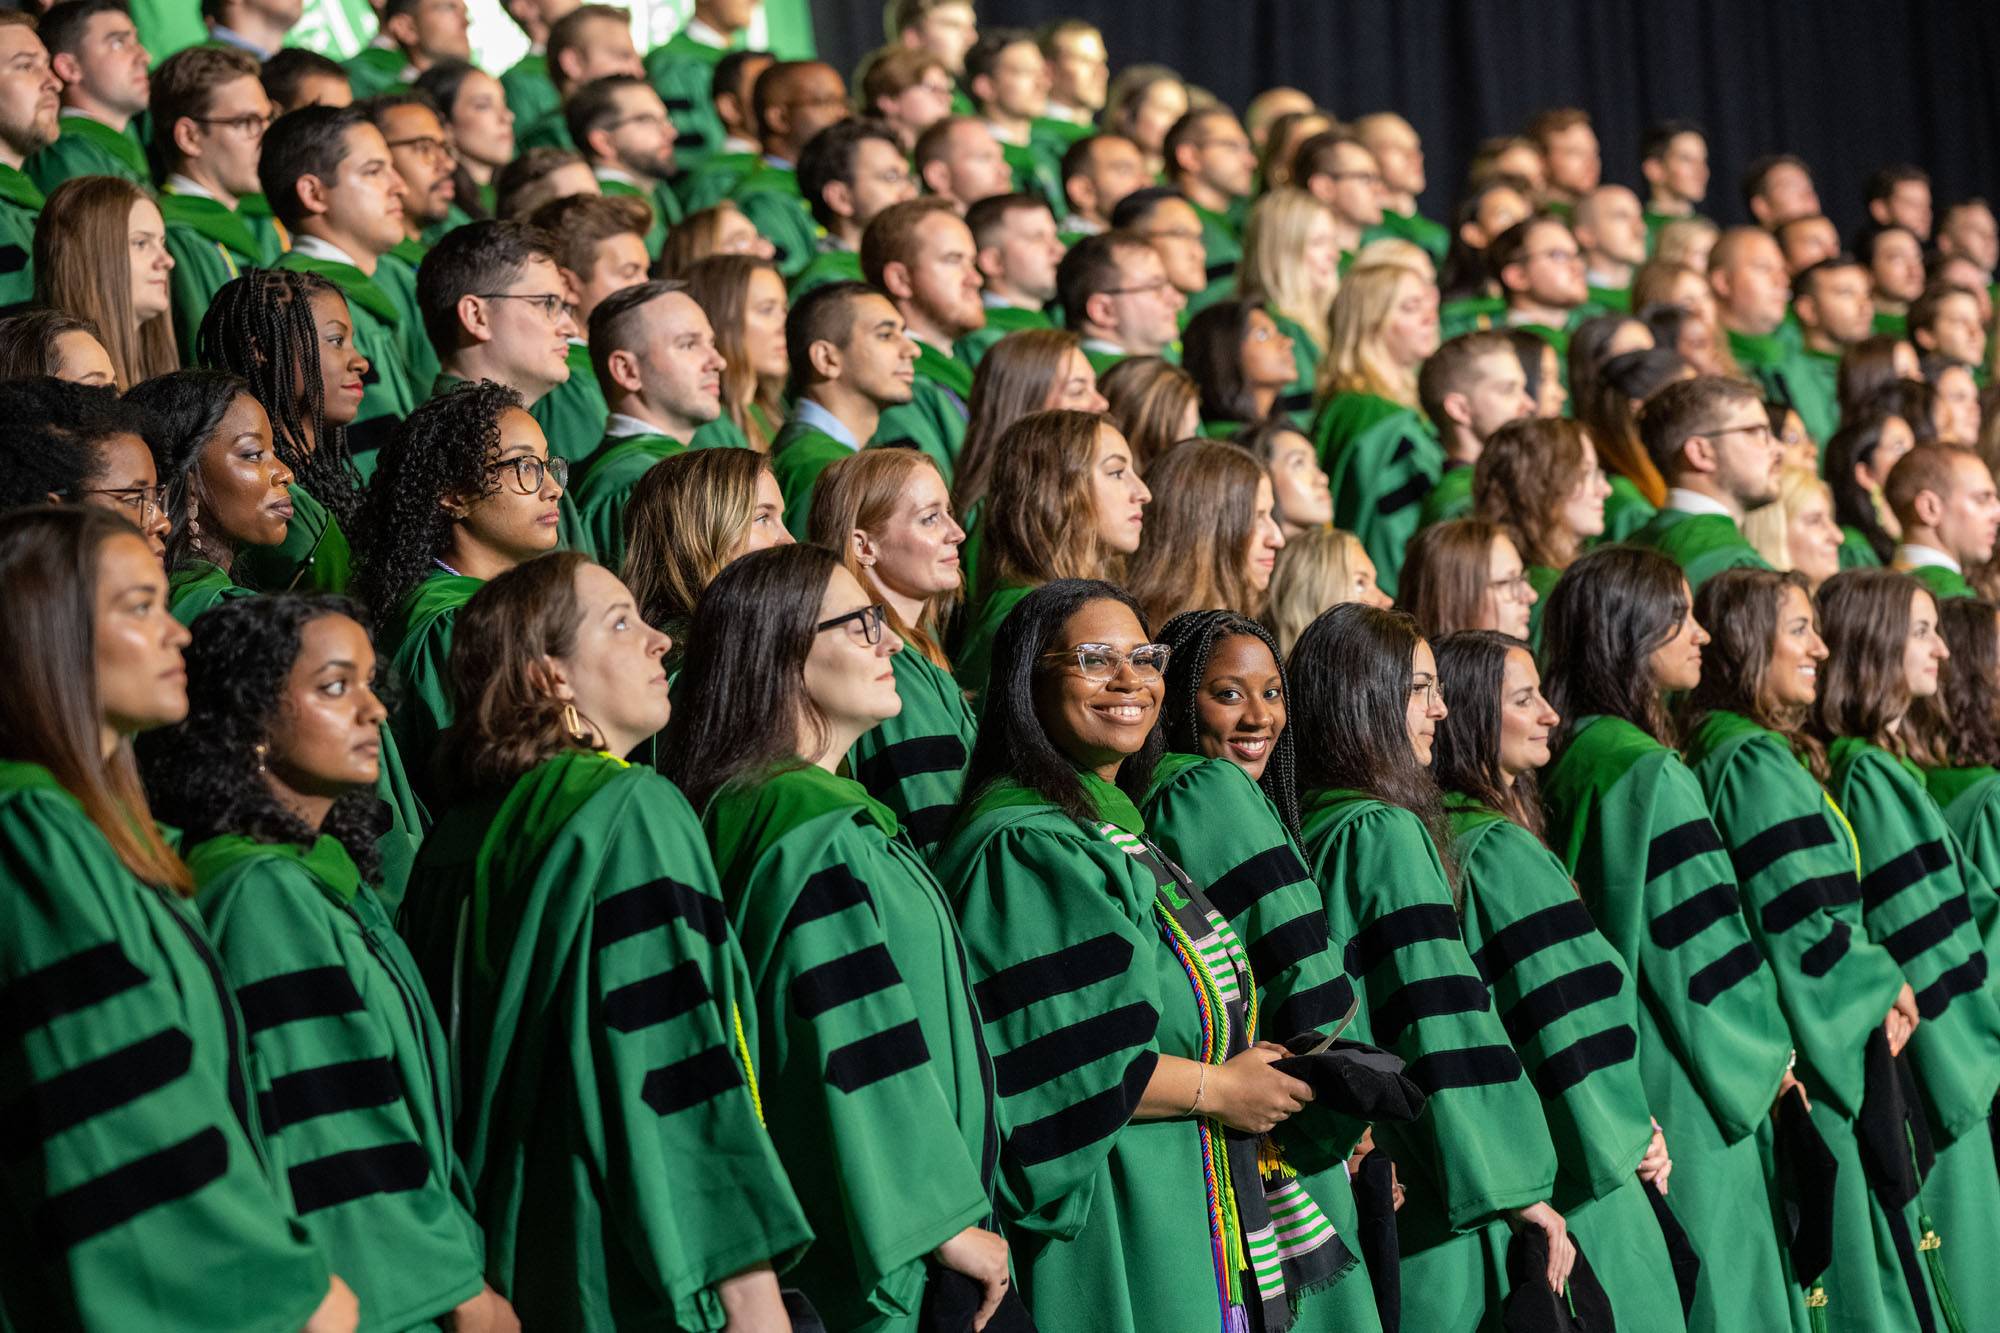 After students were hooded, the new graduates recited the osteopathic physician’s oath, a contemporary version of the oath of Hippocrates, which affirms values central to all physicians and surgeons